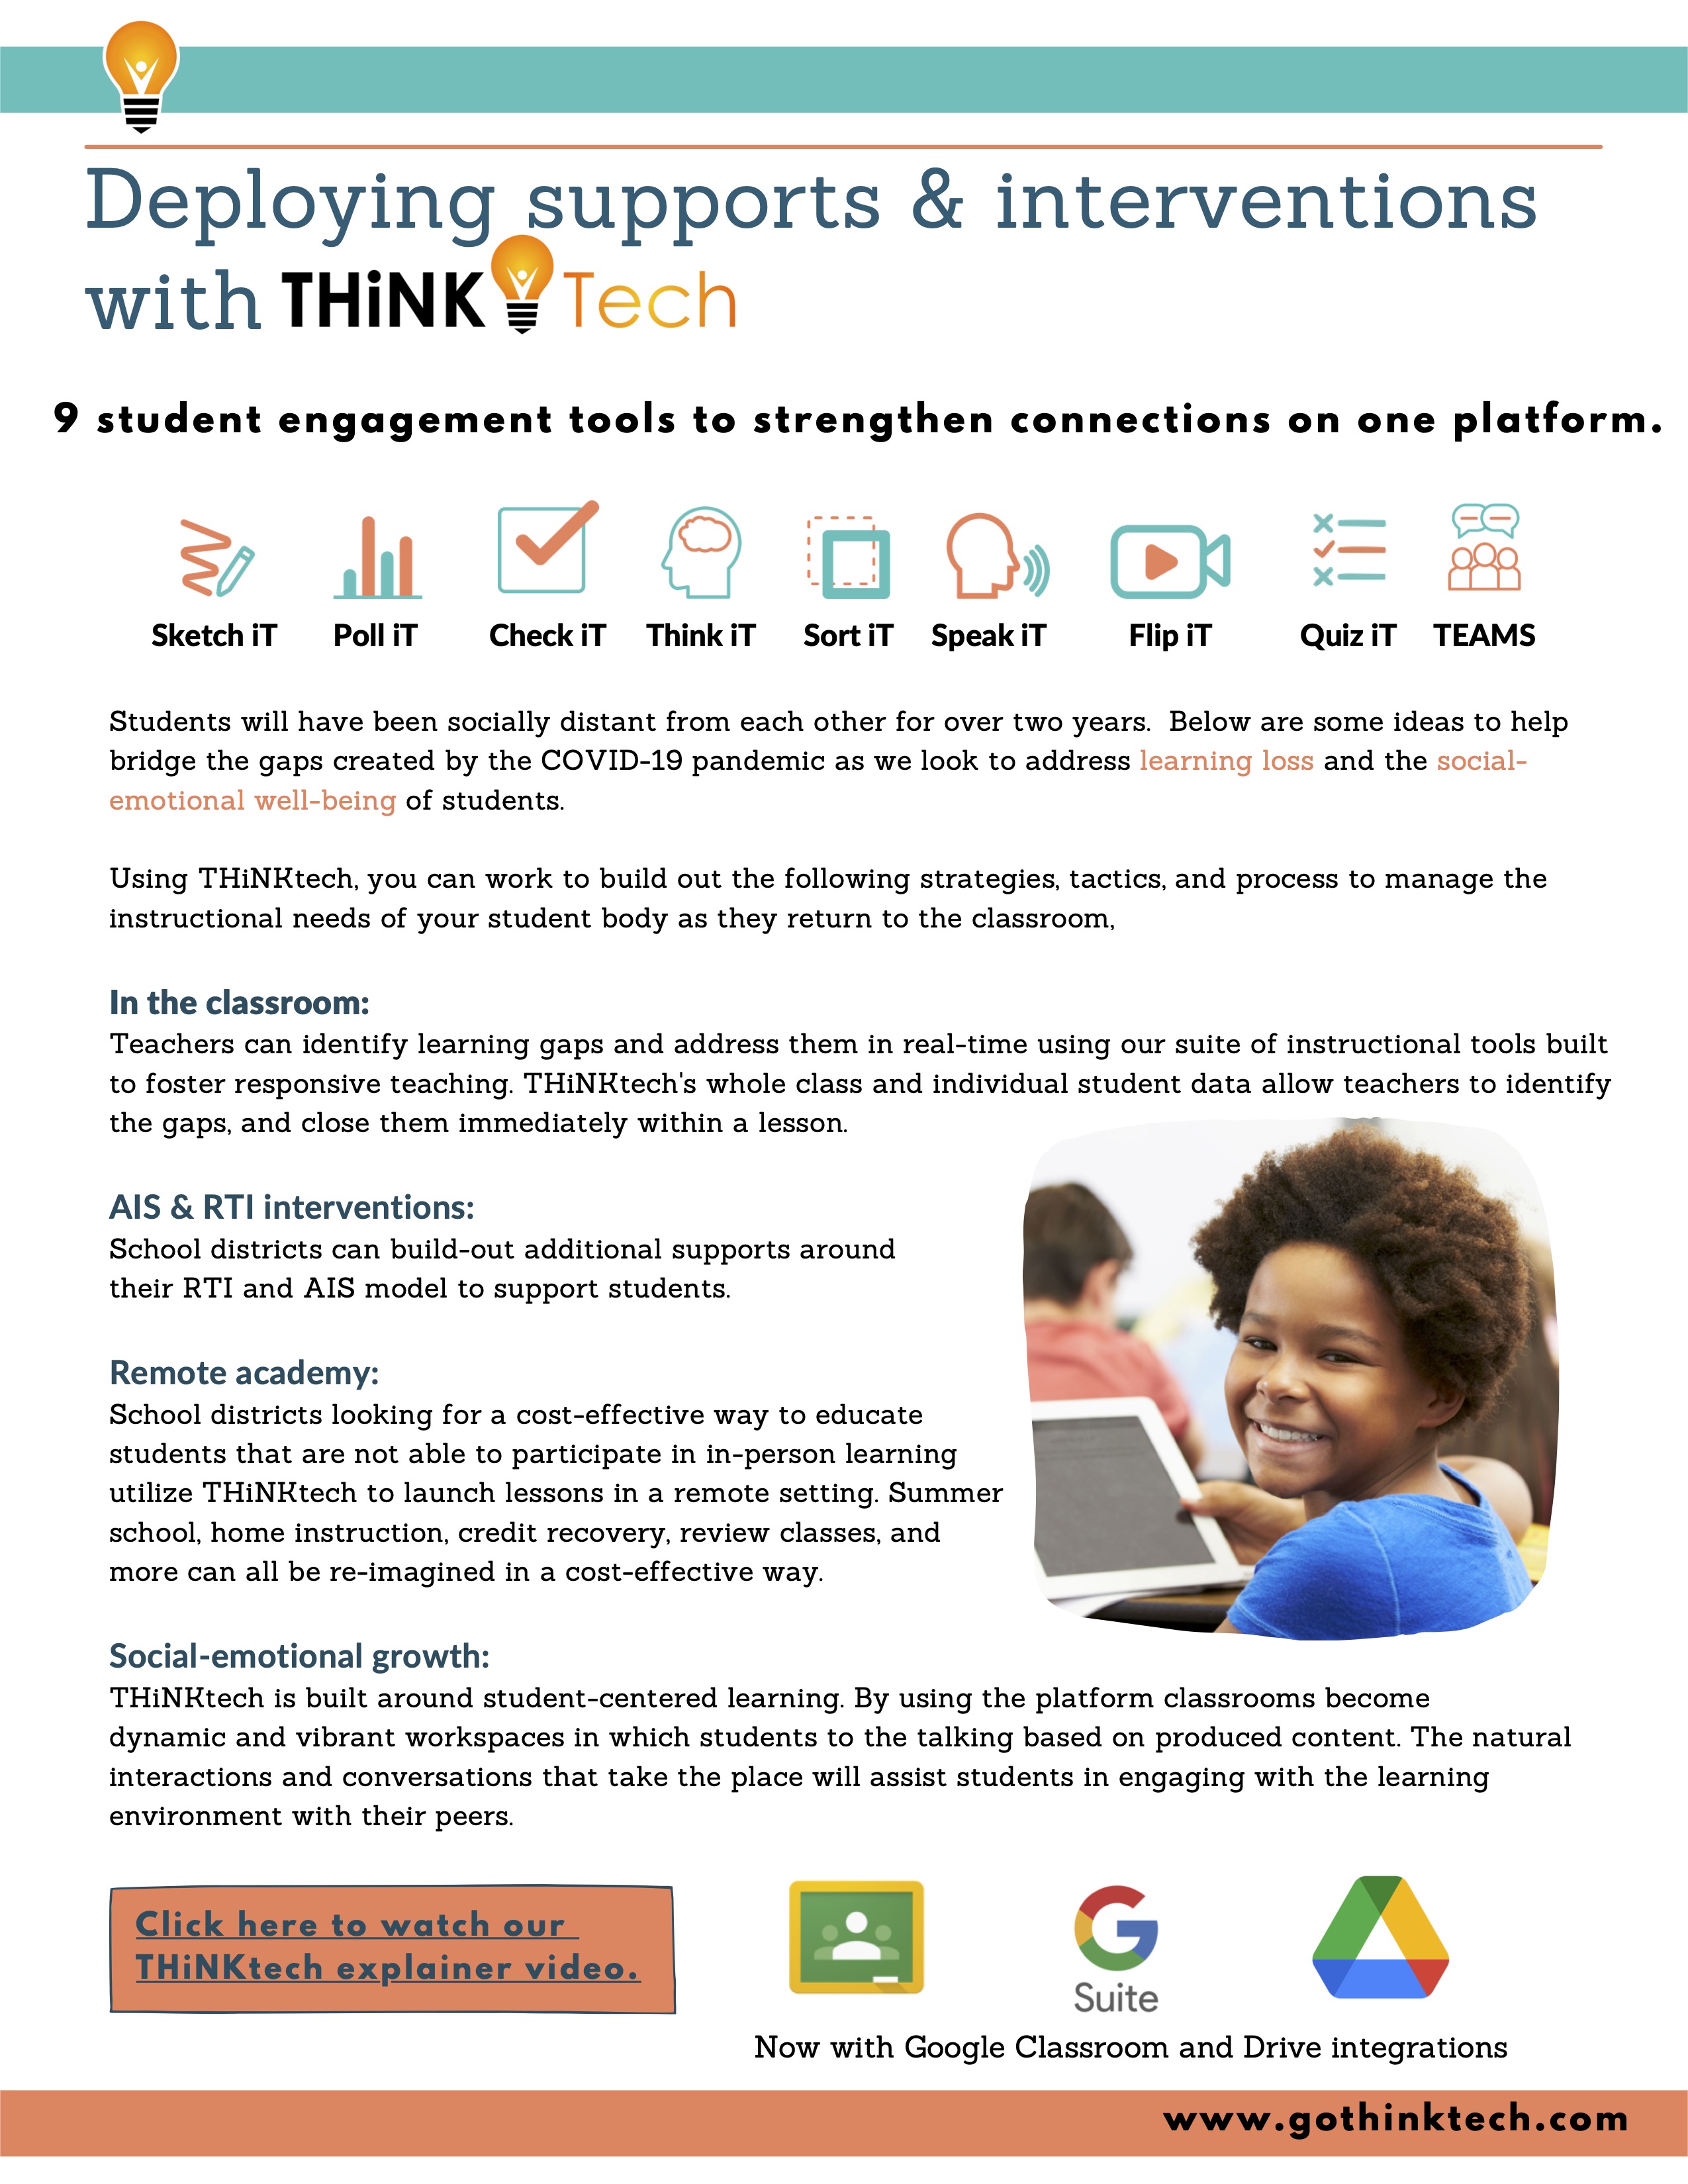 Think tech one-pager